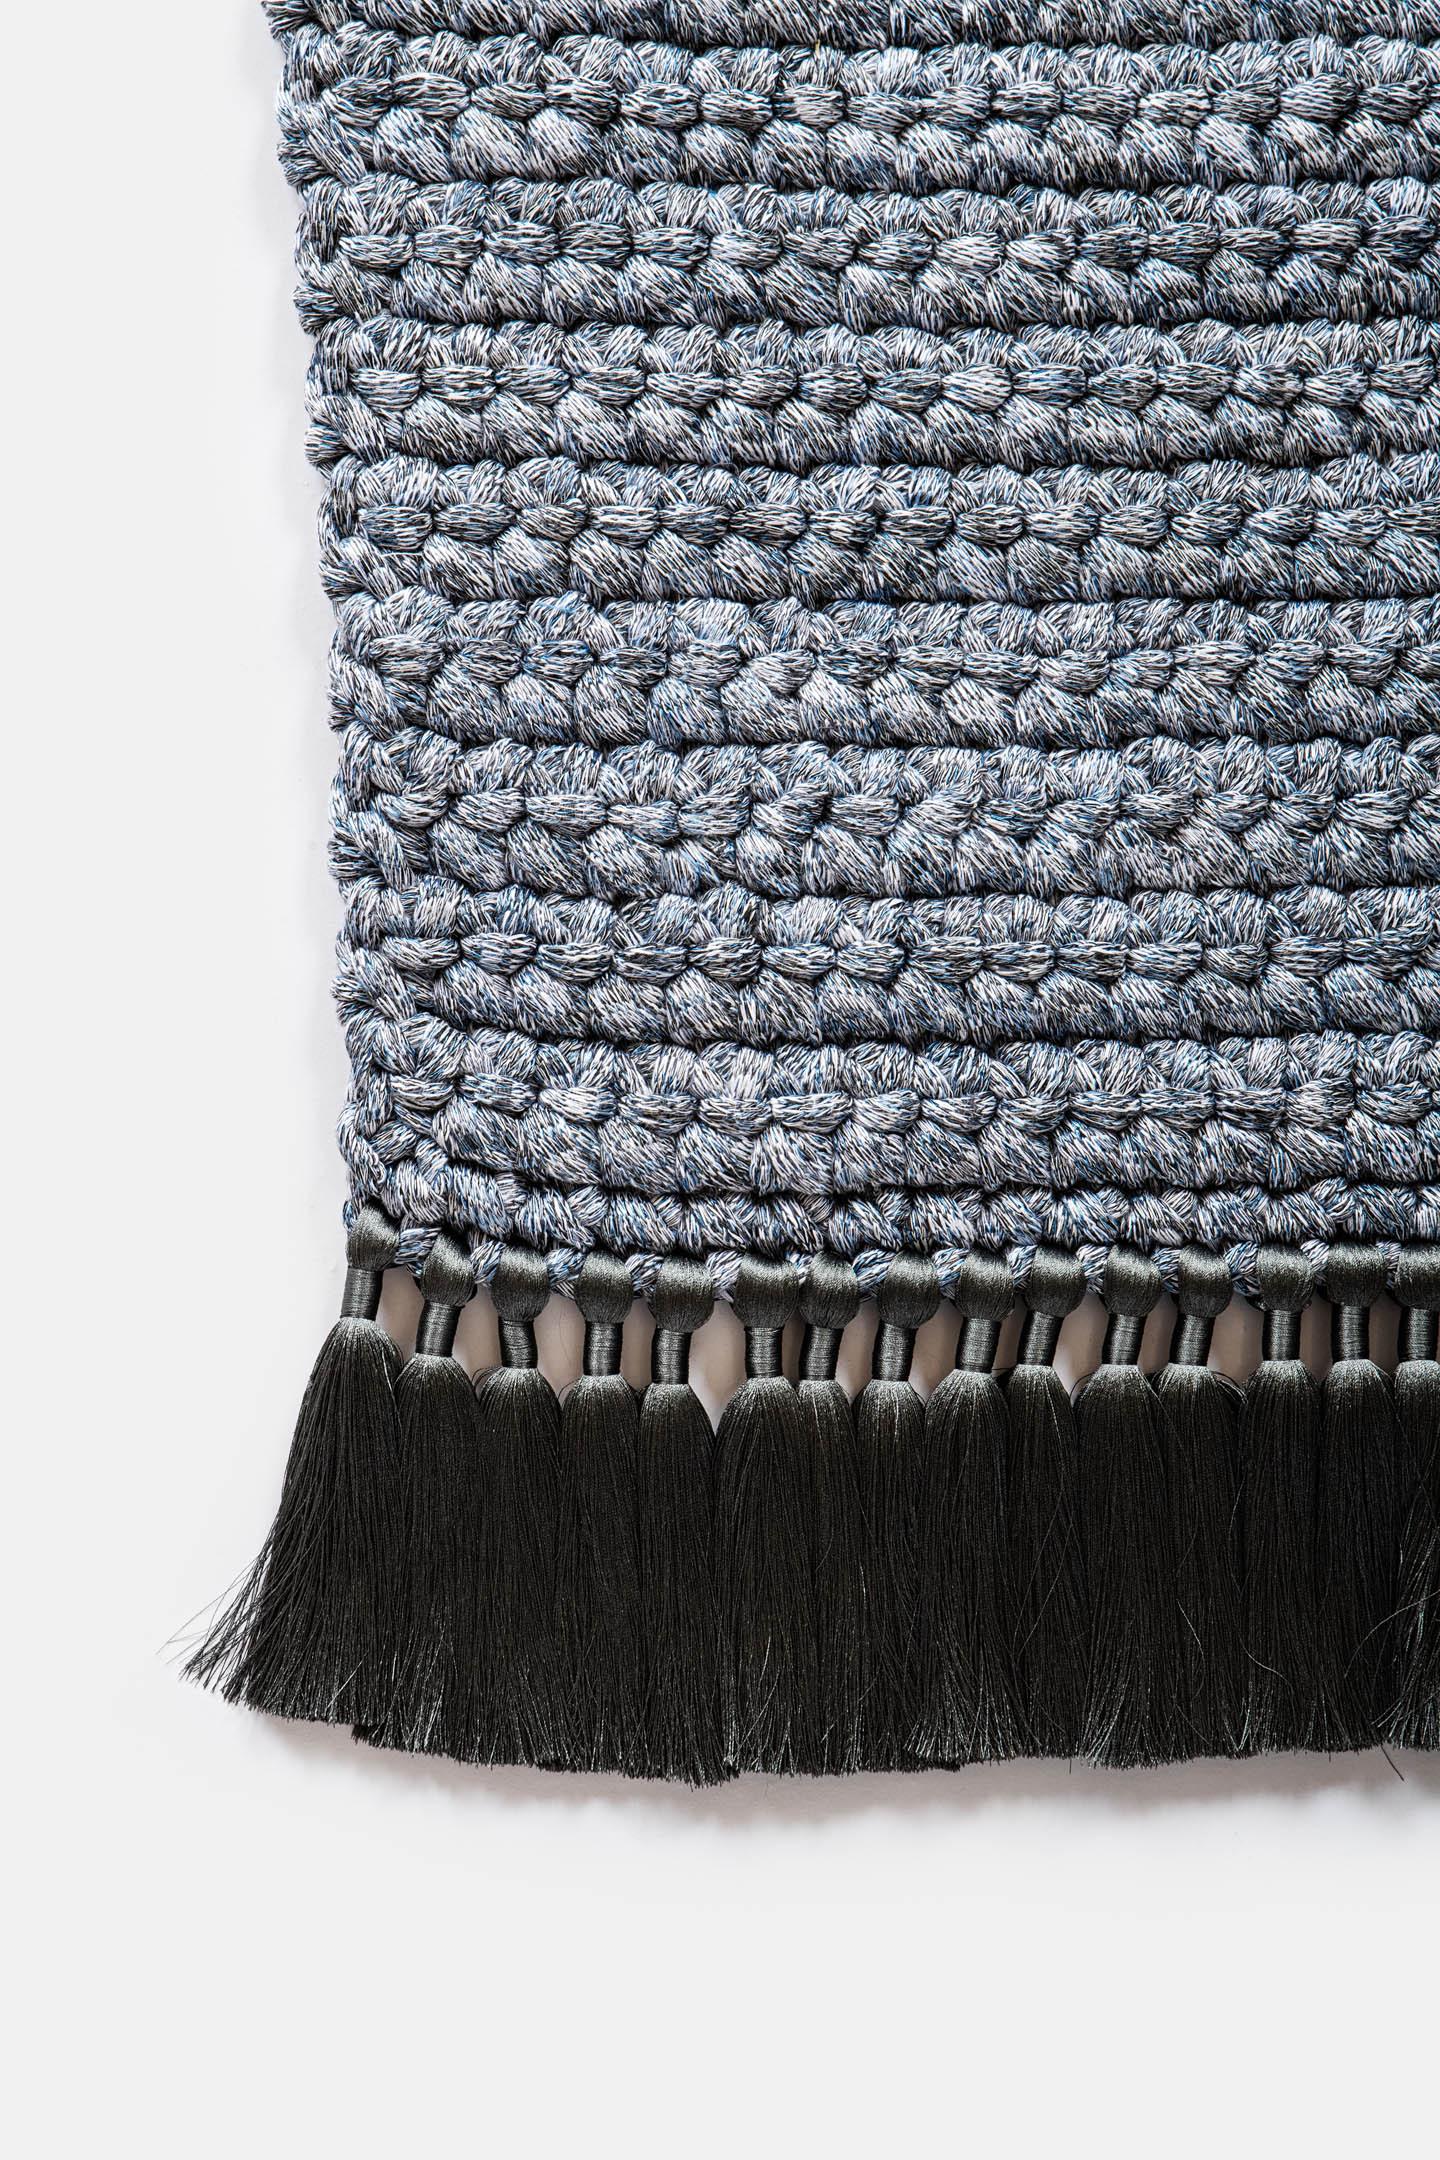 Israeli Handmade Crochet Thick Rug 120x200 cm in Blue Grey Colors with Grey Tassels For Sale